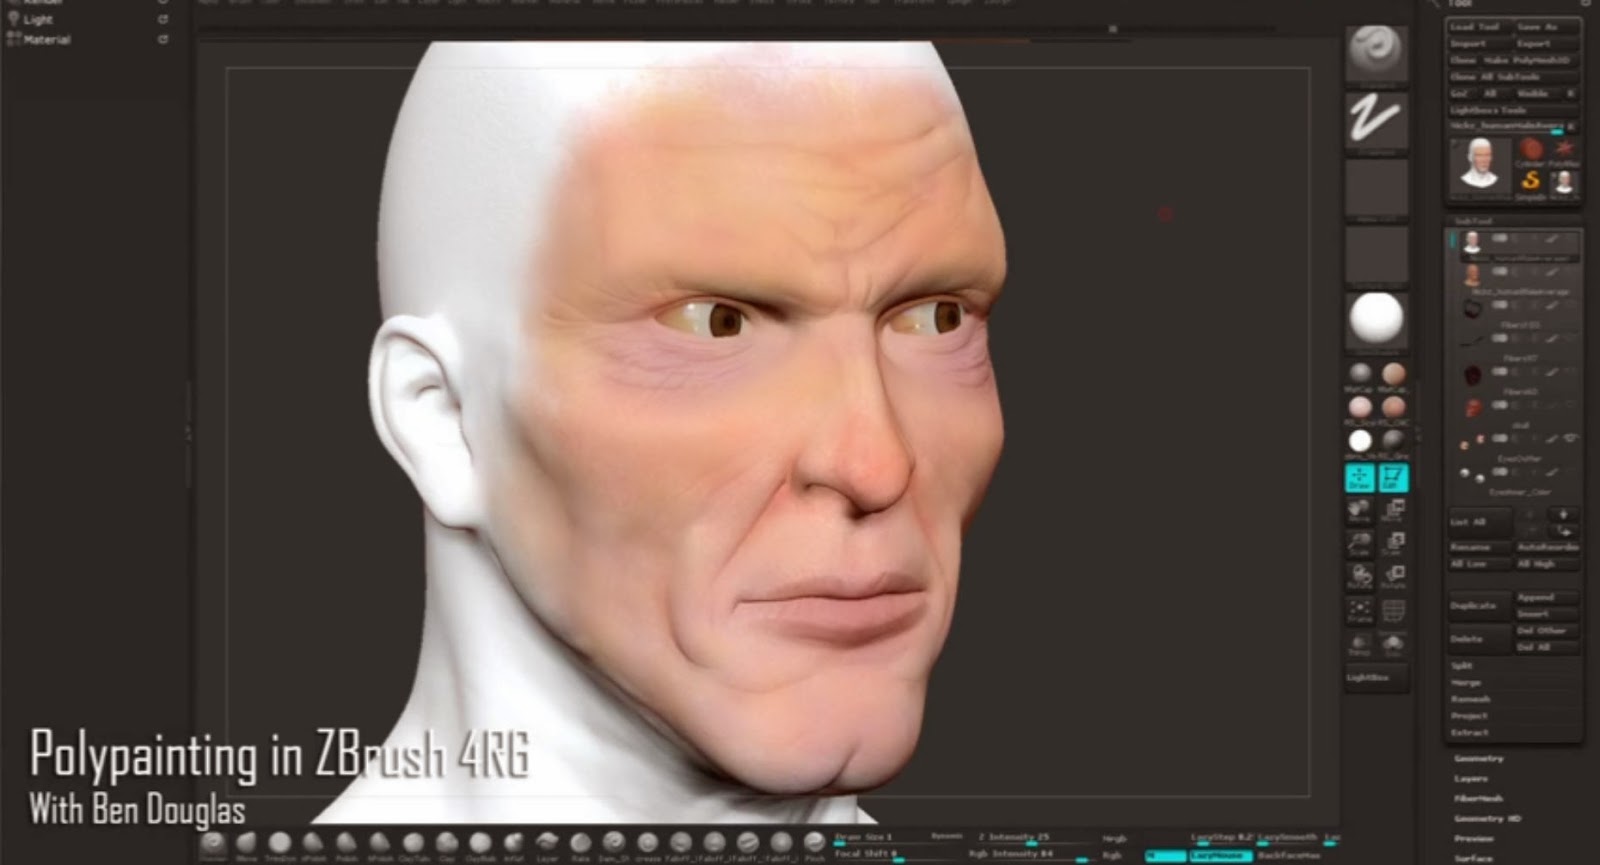 polipaint in zbrush